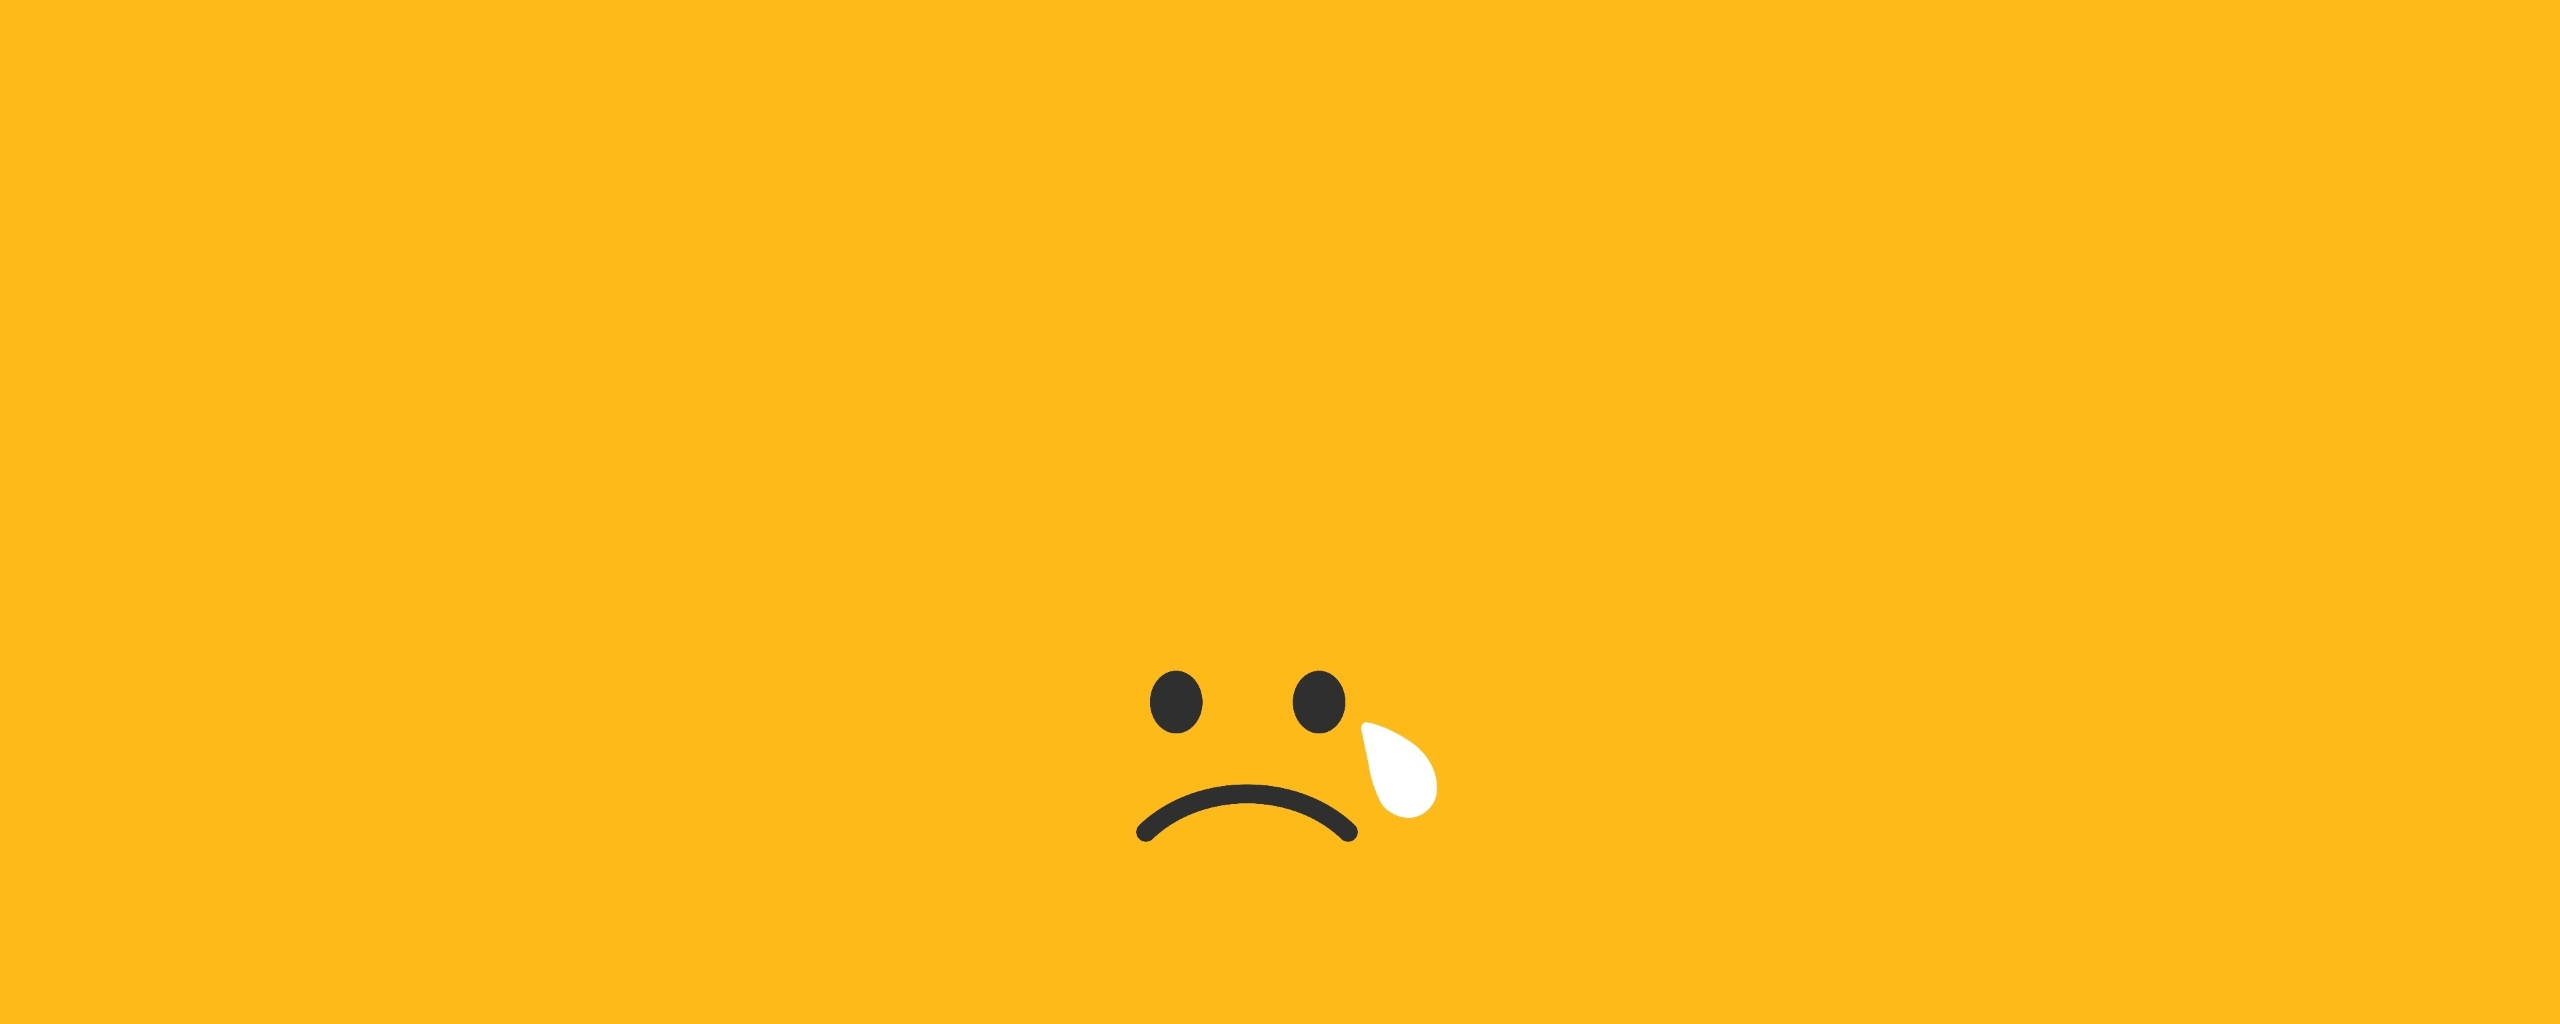 sad full of tears wallpapers,yellow,facial expression,orange,emoticon,smile